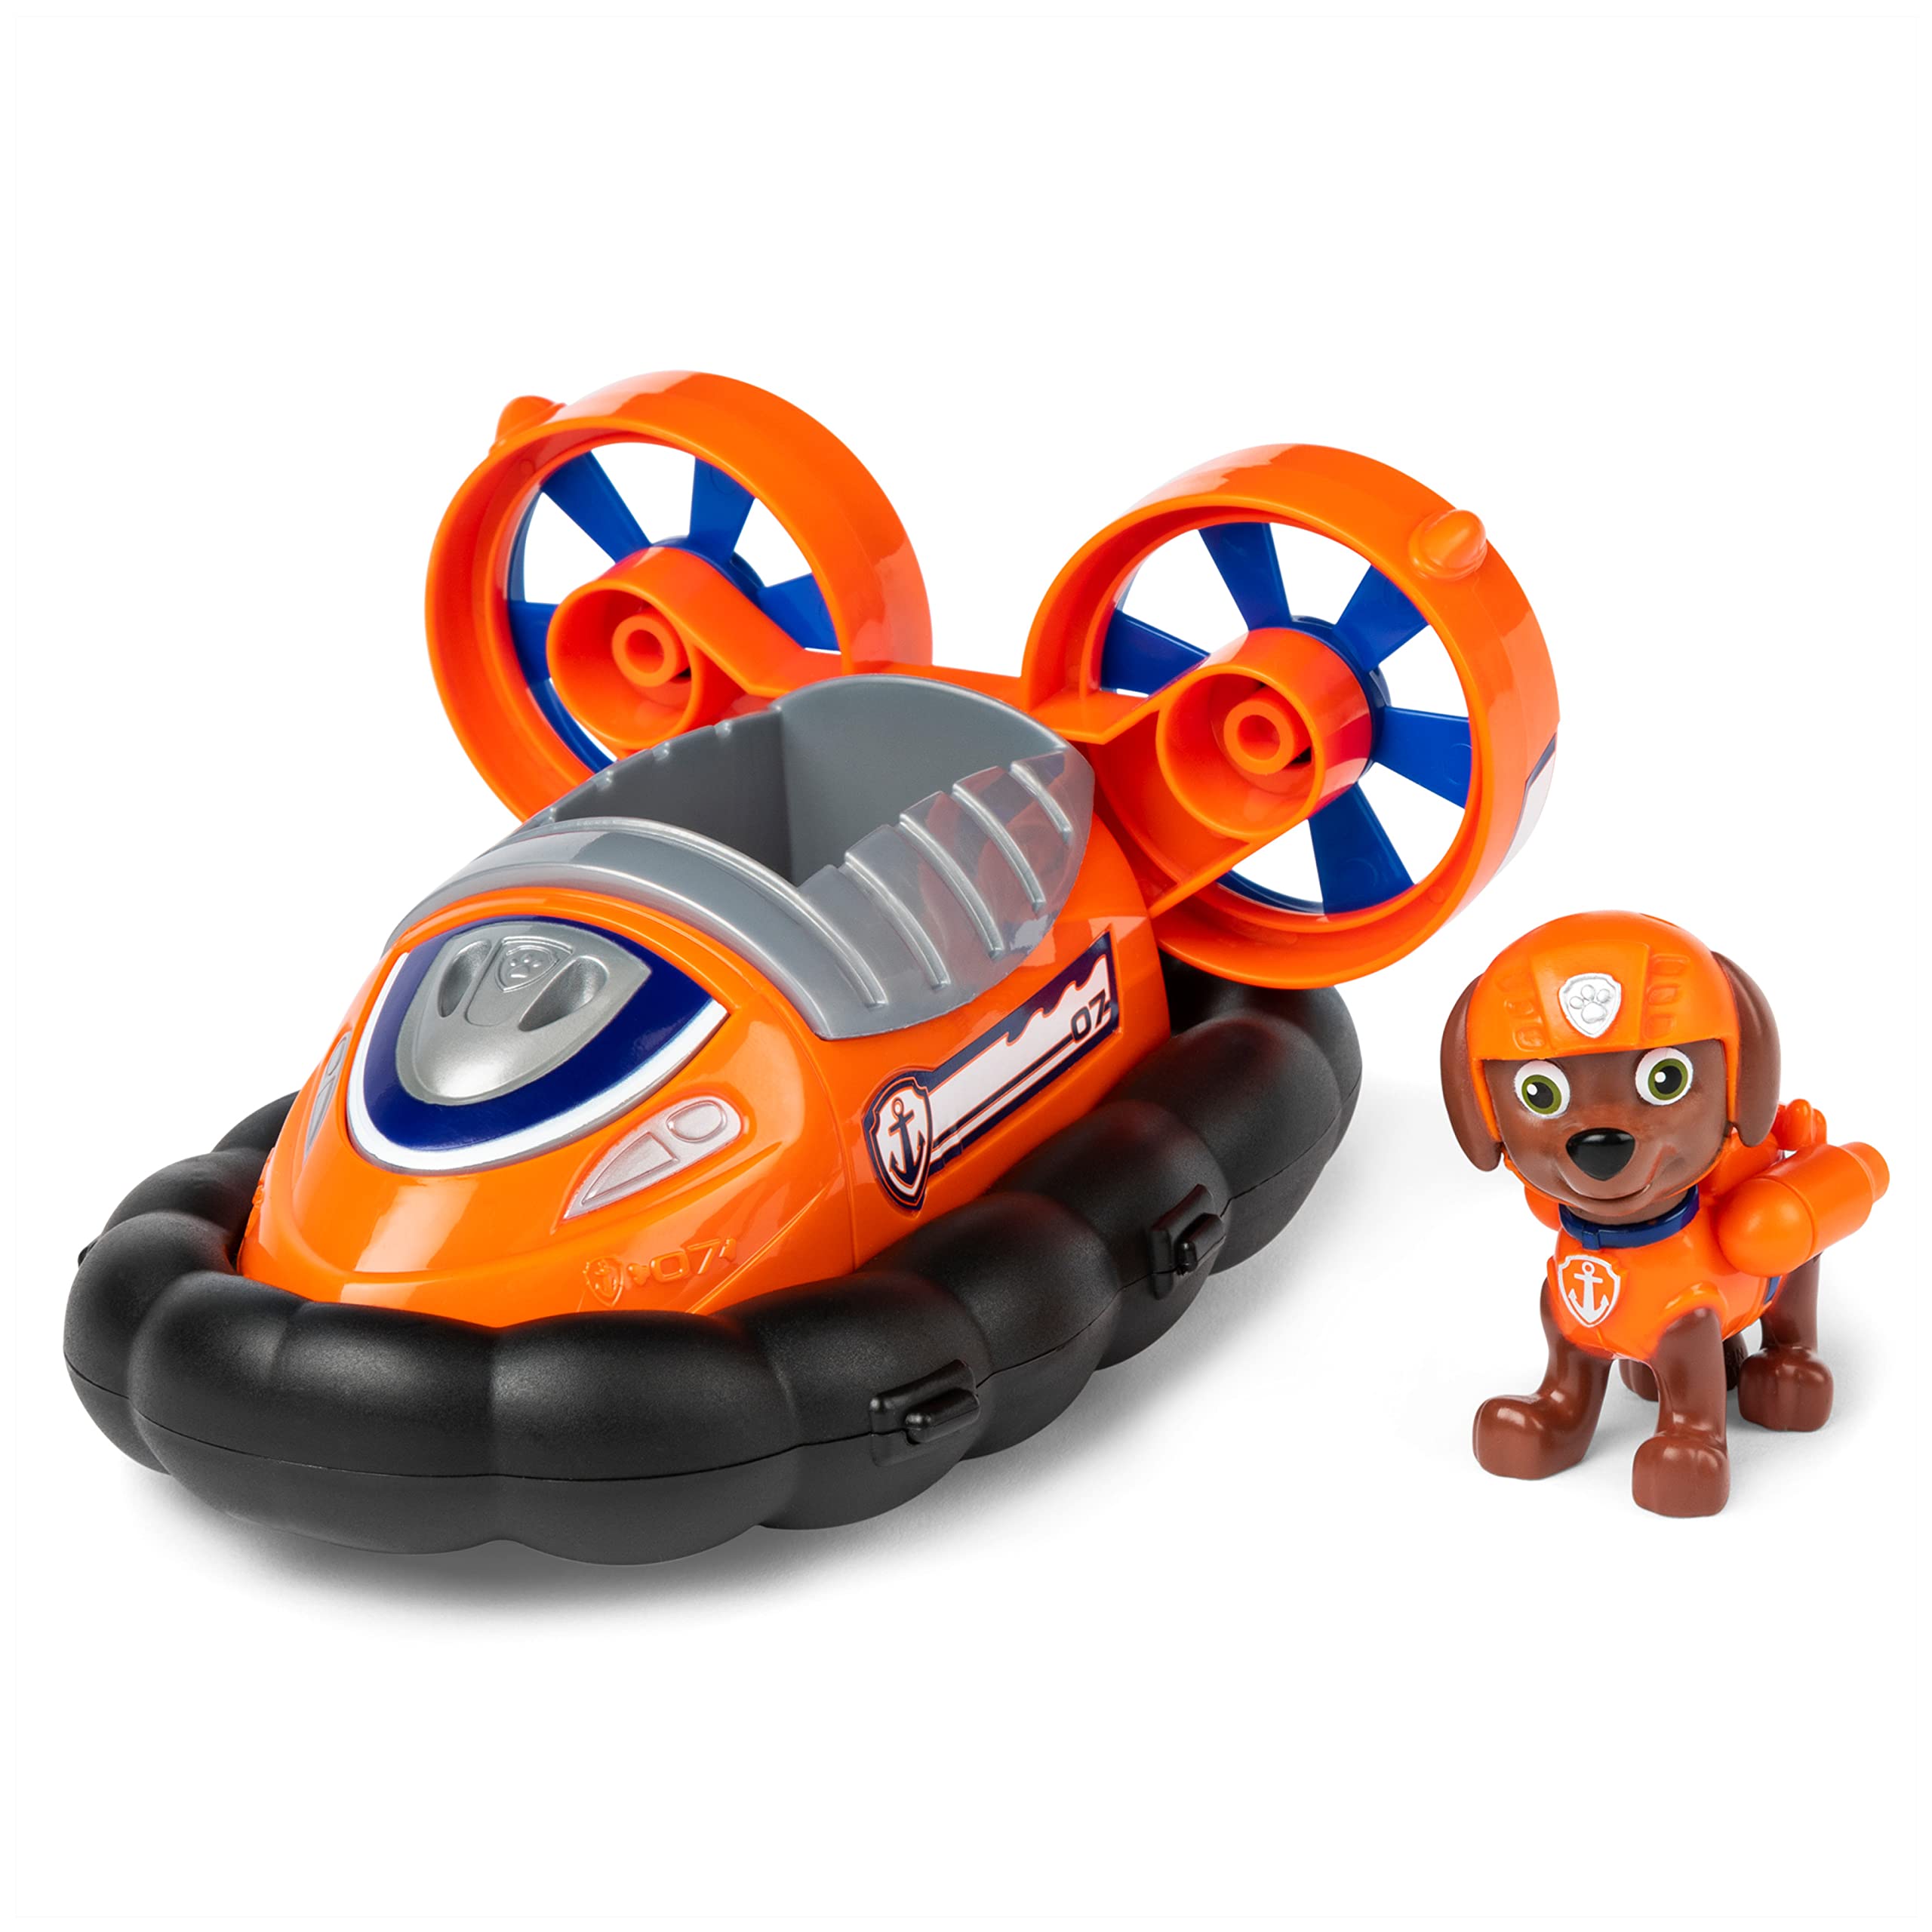 Paw Patrol, Zuma’s Hovercraft, Toy Vehicle with Collectible Action Figure, Sustainably Minded Kids Toys for Boys & Girls Ages 3 and Up